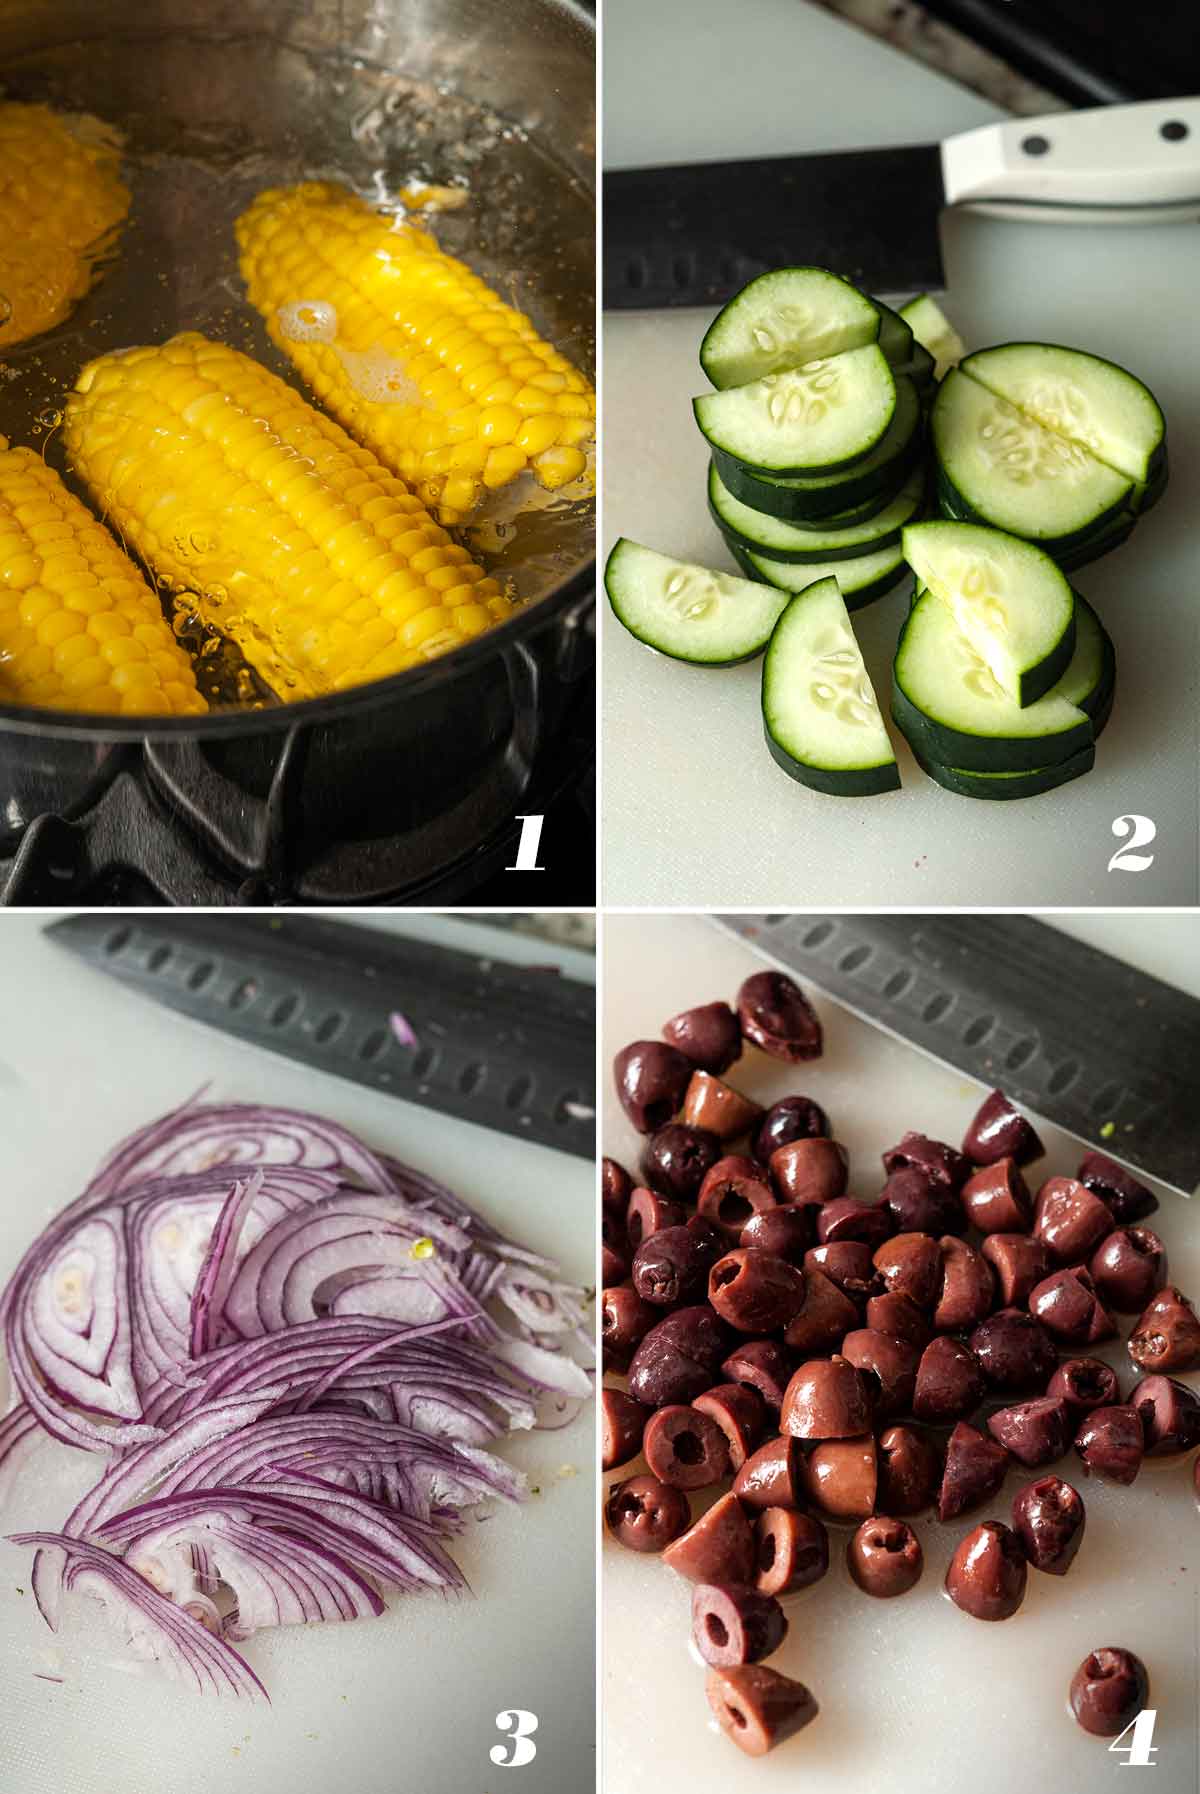 A collage of 4 numbered images showing how to prep ingredients for summer corn salad.